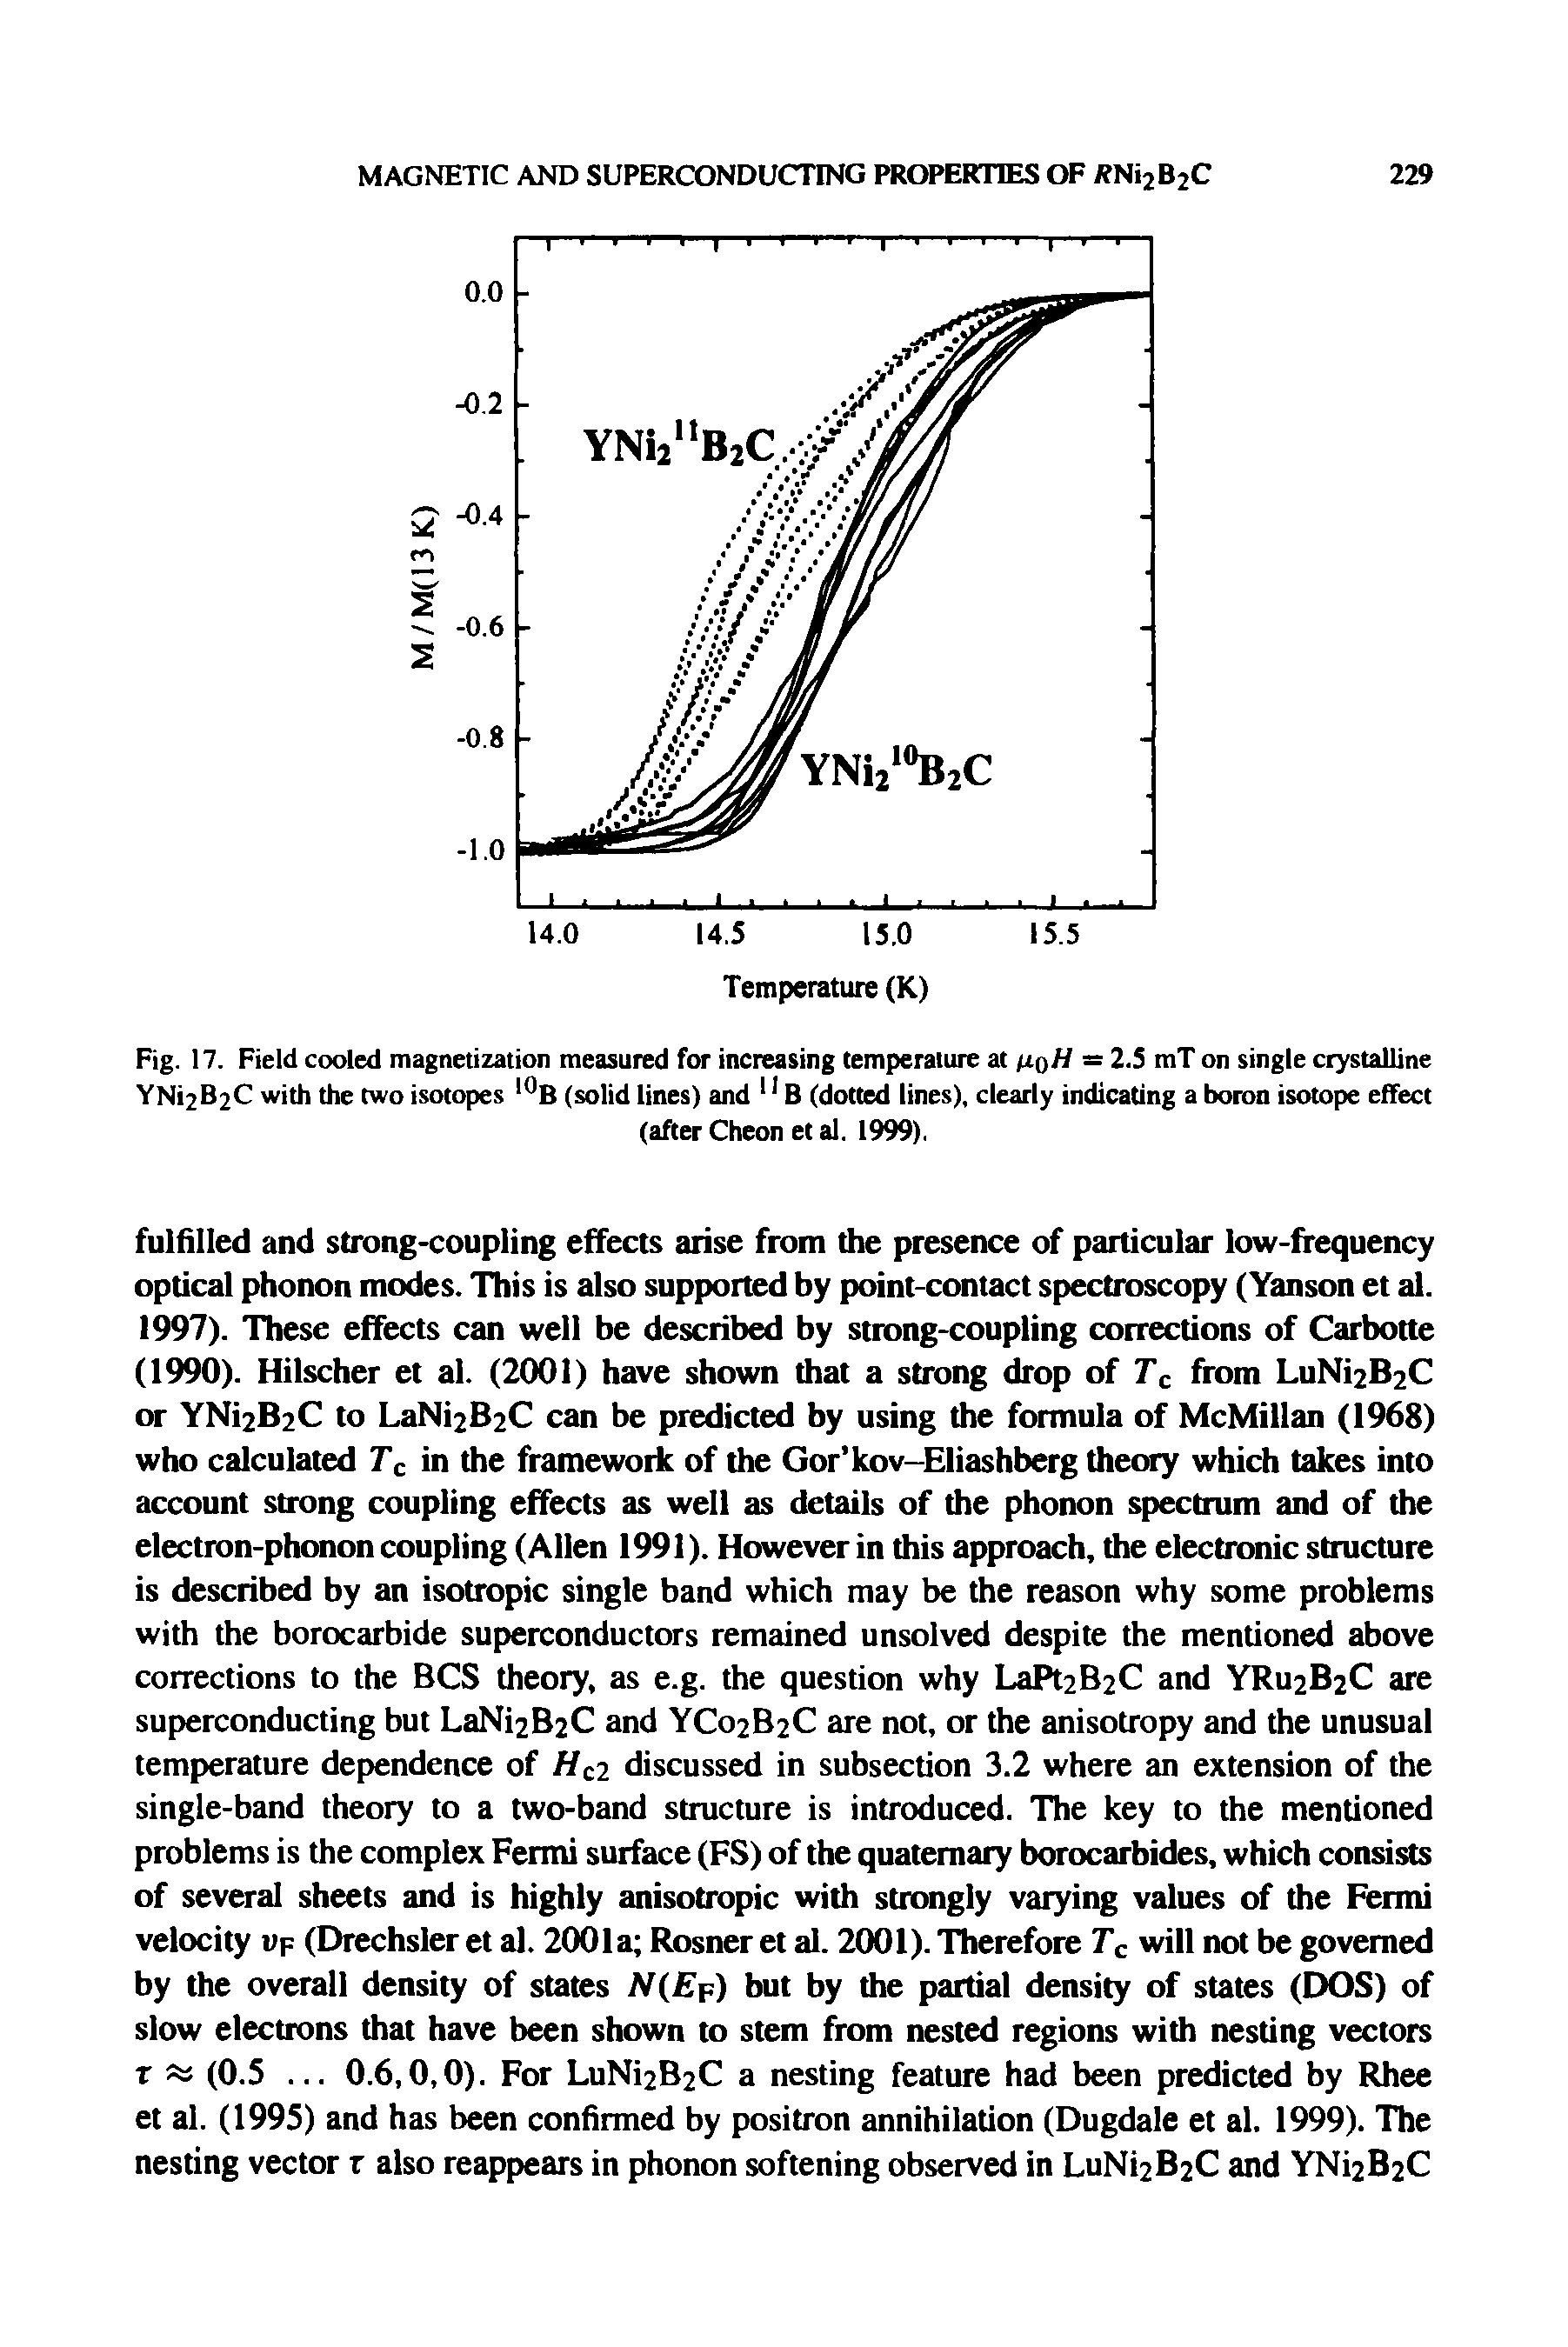 Fig. 17. Field cooled magnetization measured for increasing temperature at hqH = 2.5 mT on single crystalline YNi2B2C with the two isotopes l0B (solid lines) and 11B (dotted lines), clearly indicating a boron isotope effect...